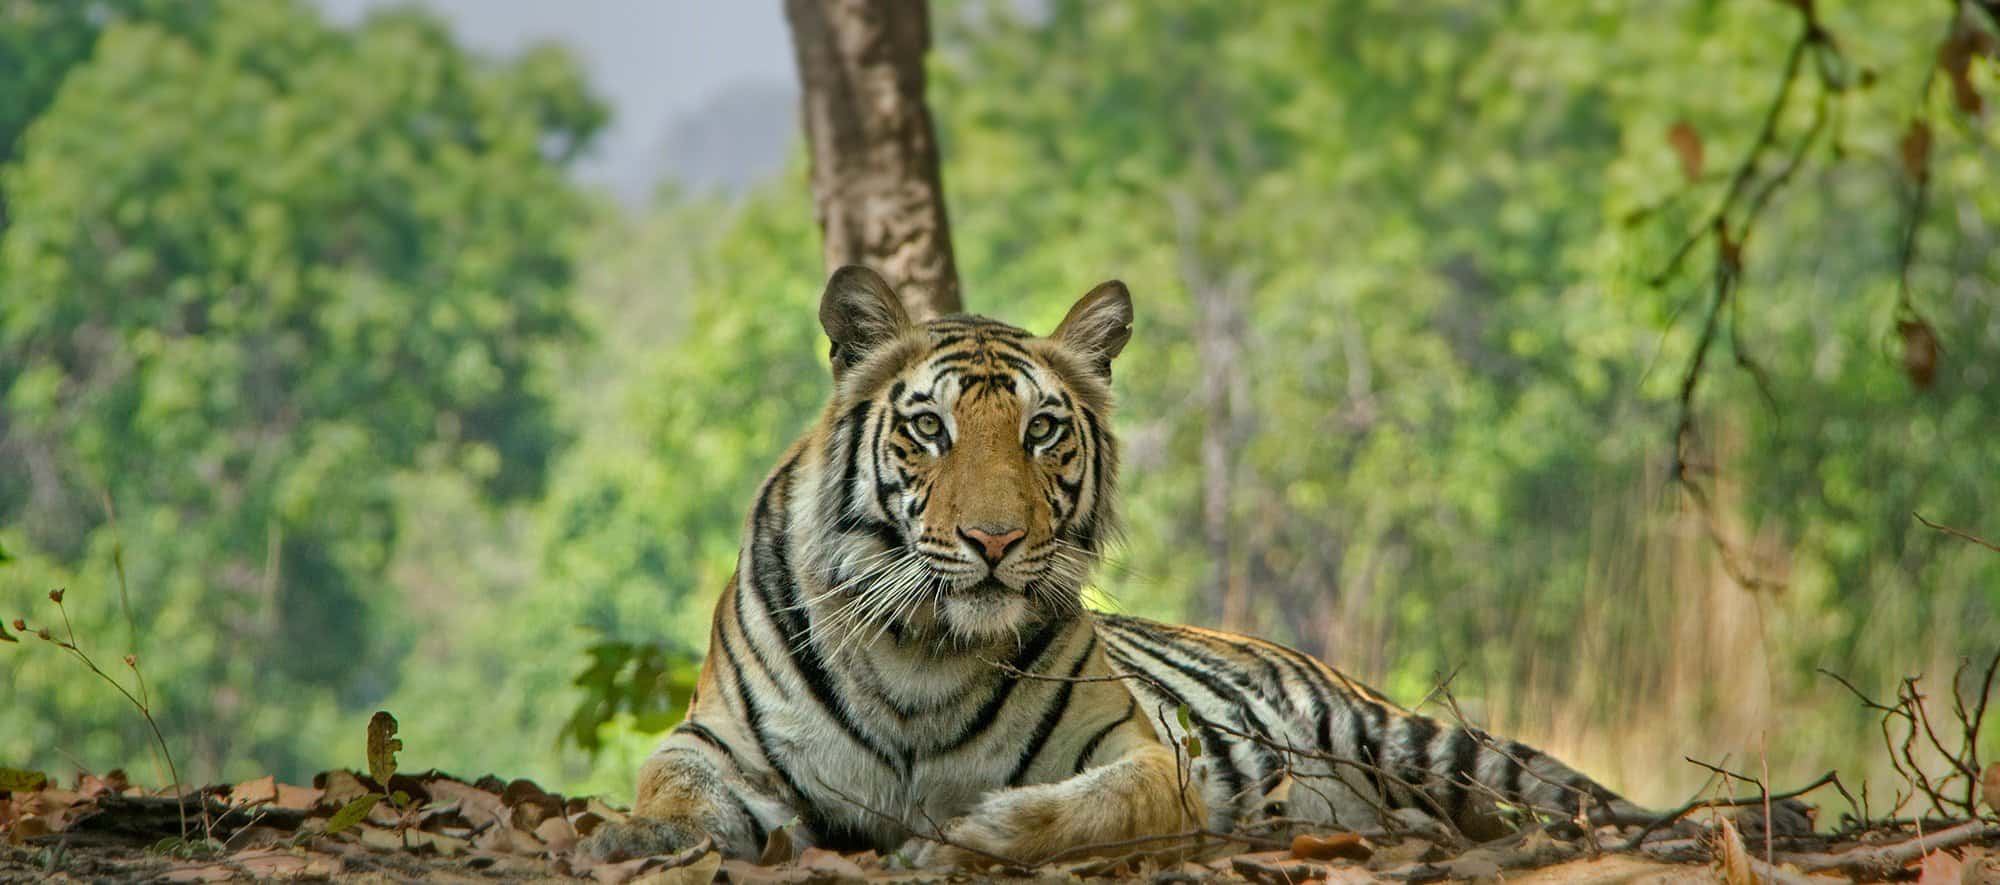 Things to pack before going to Tiger Safari in India Bandhavgarh